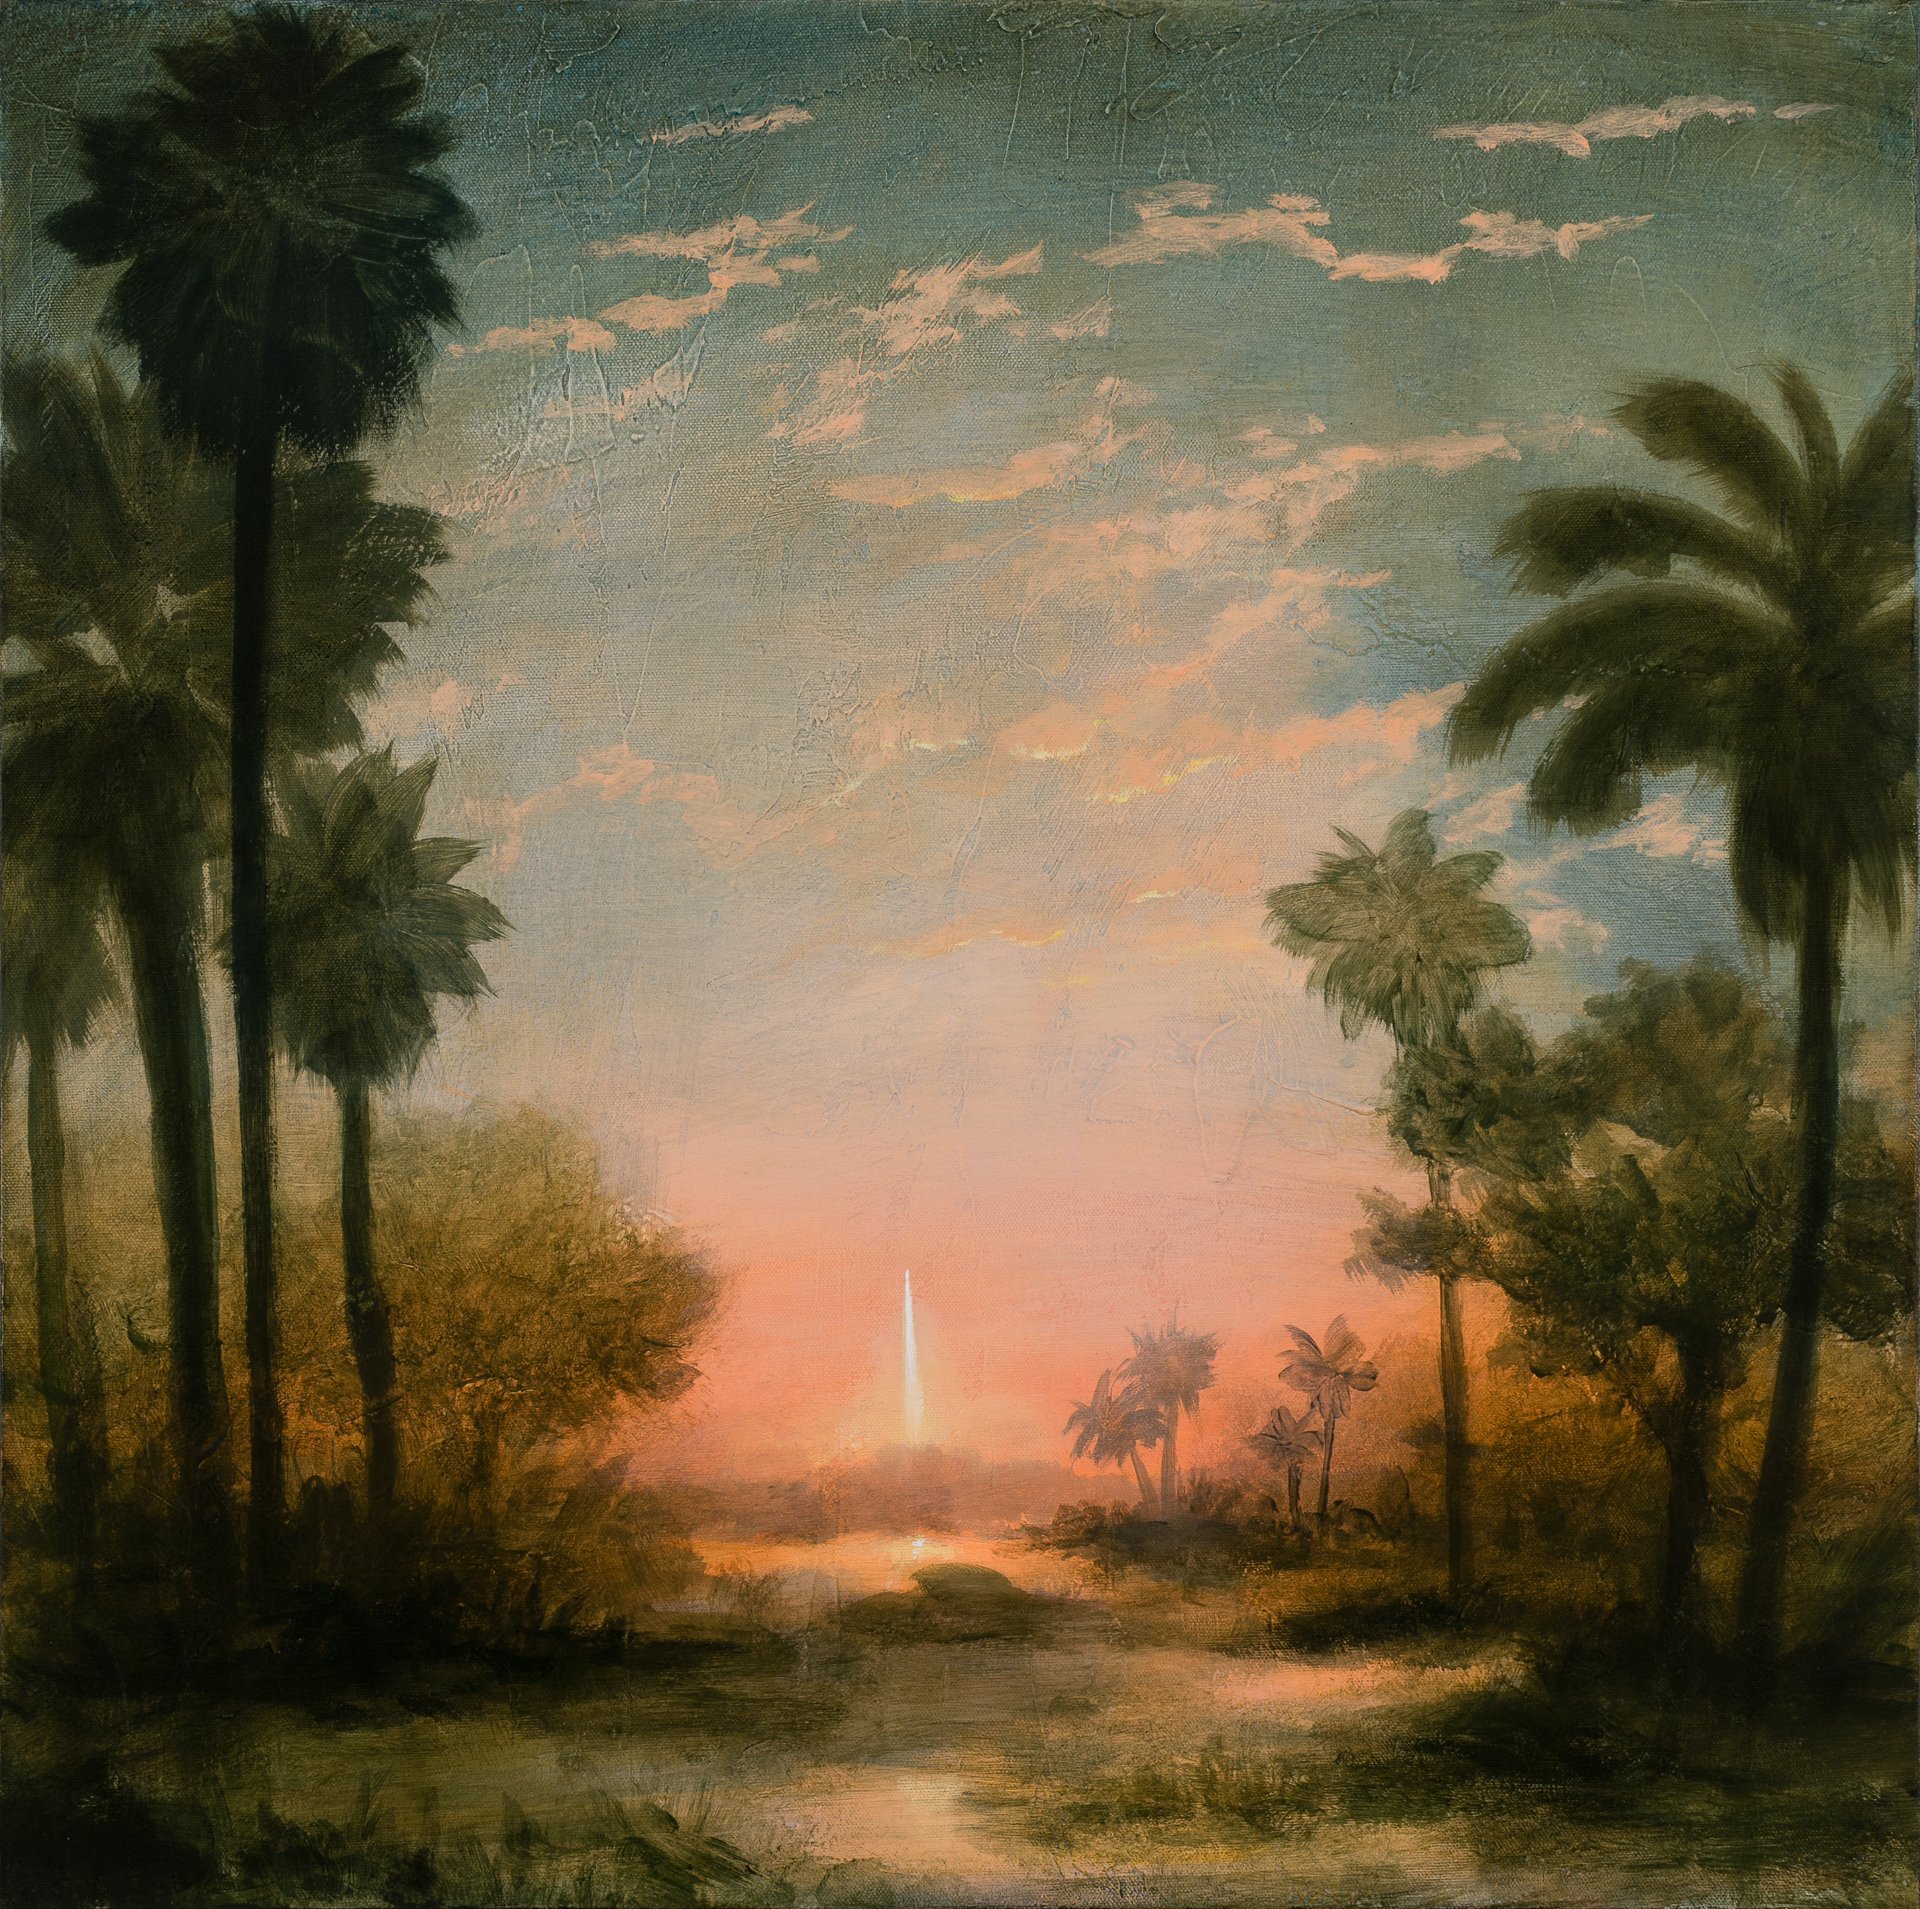 Rocket Launch With Palm Trees, 24"x24", acrylic on canvas